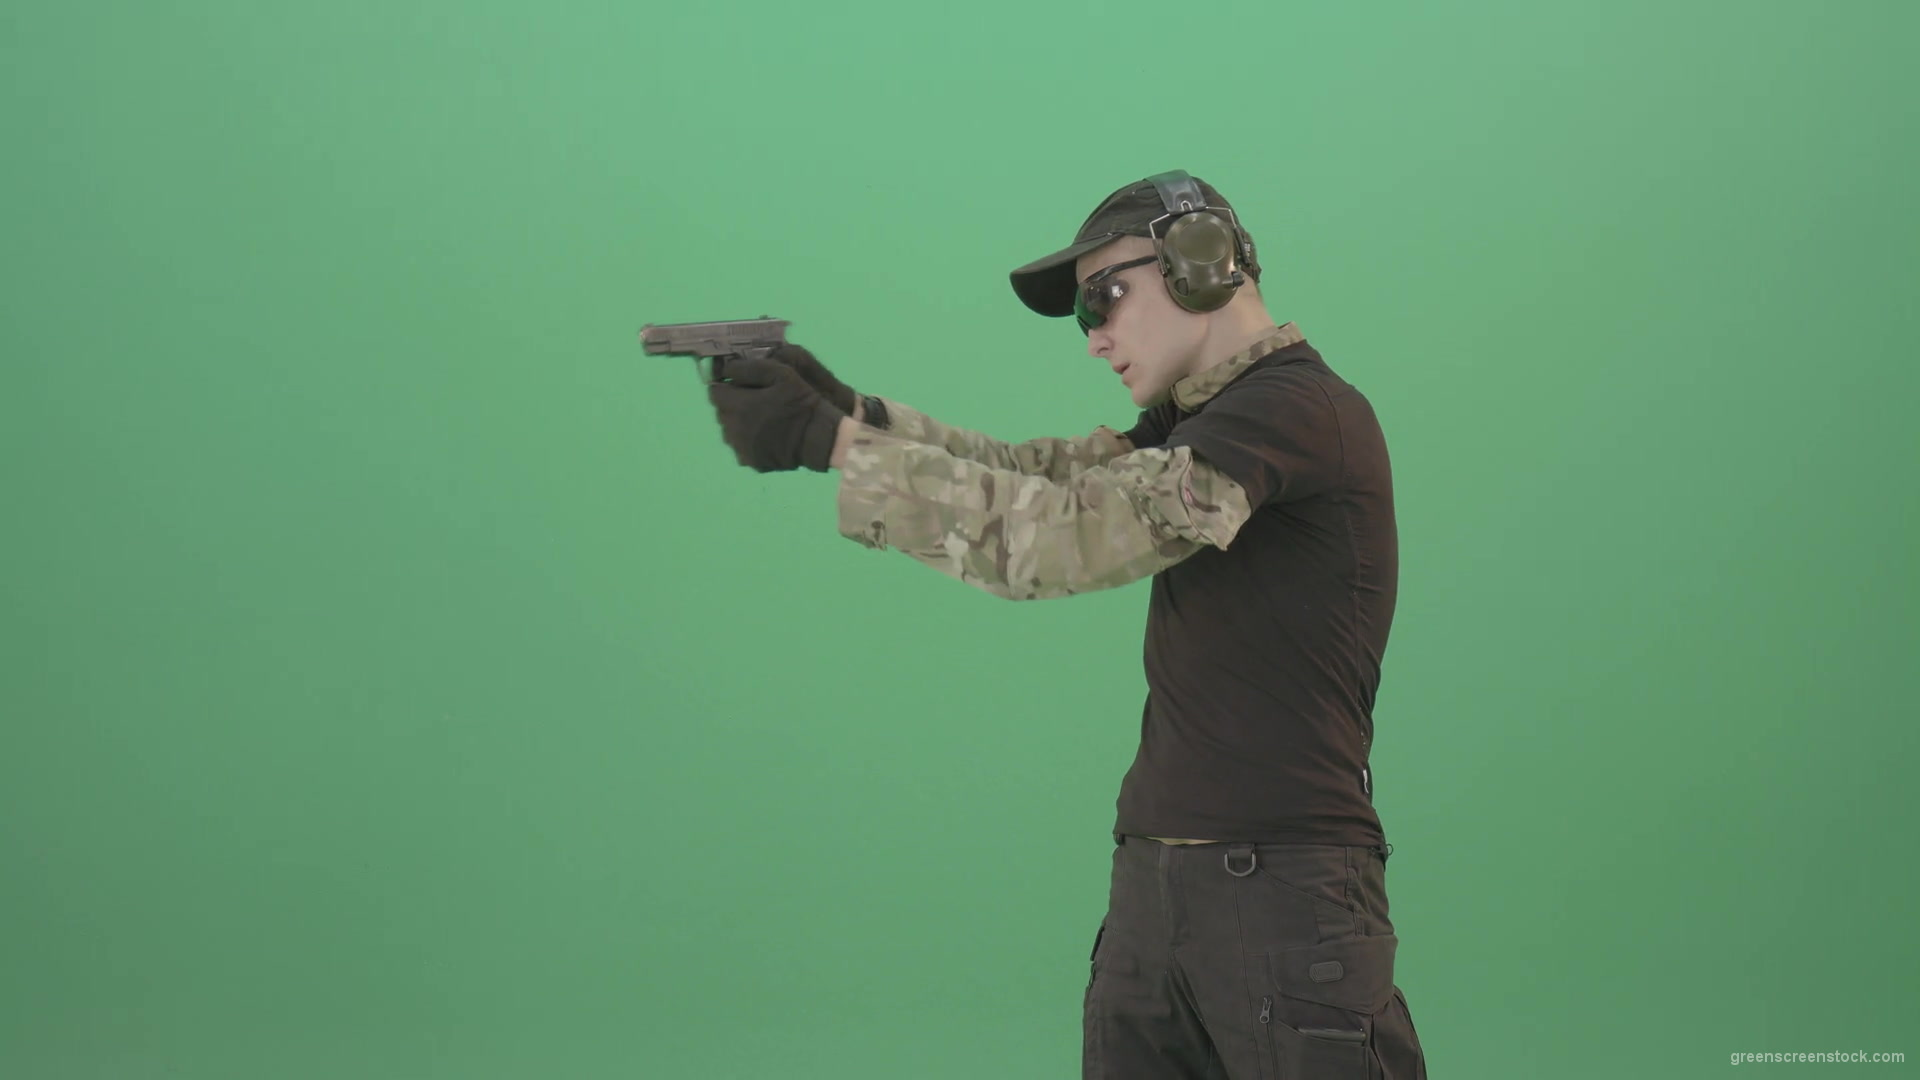 Young-boy-sodier-testin-small-pistol-gun-and-shooting-isolated-on-green-screen-4K-Video-Footage-1920_002 Green Screen Stock